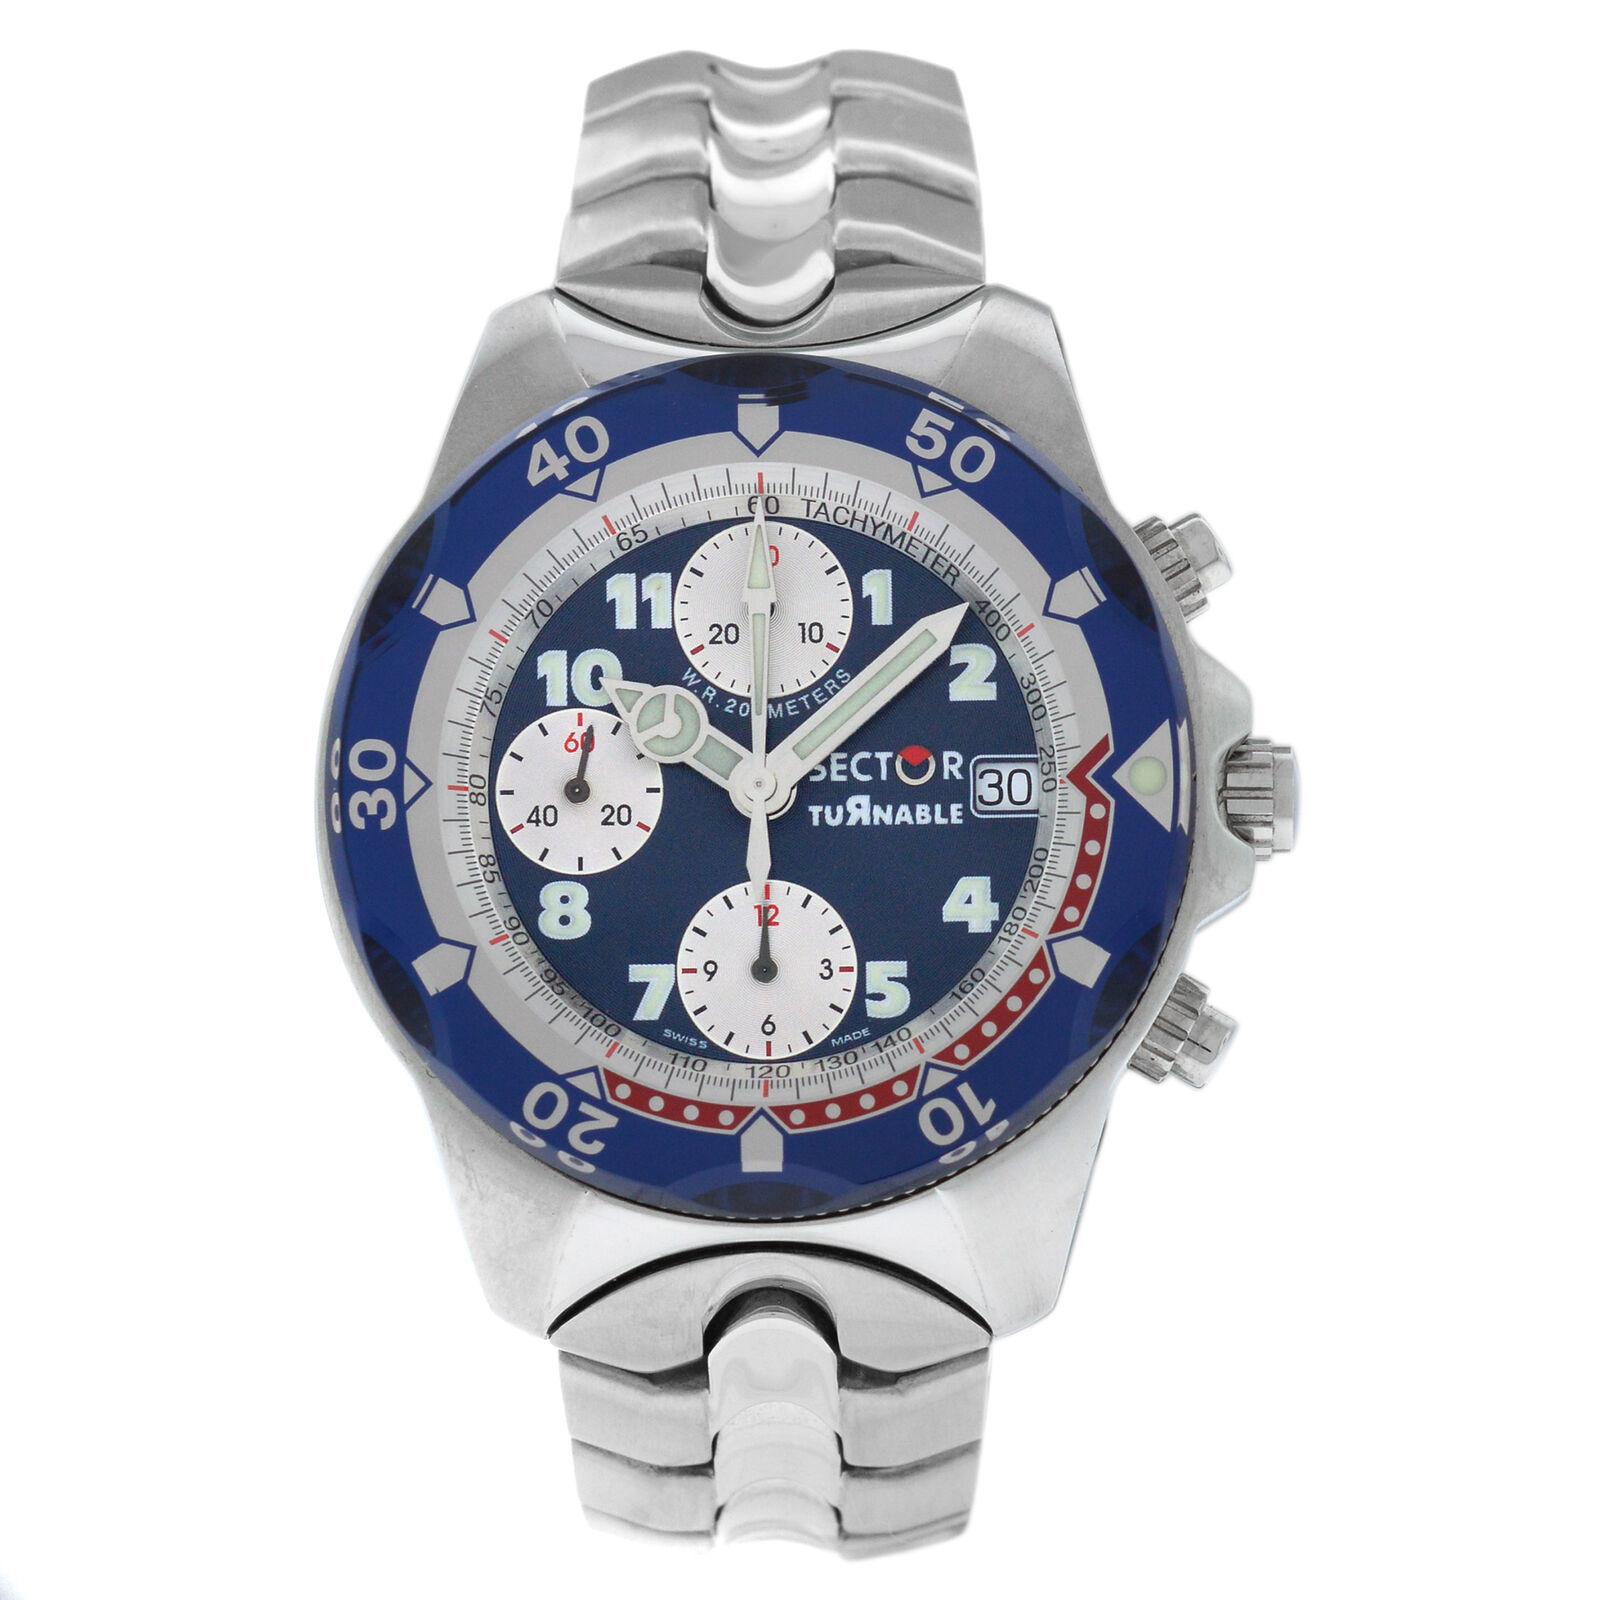 New Authentic Men's Sector Turnable Chrono VALJOUX 7750 Watch